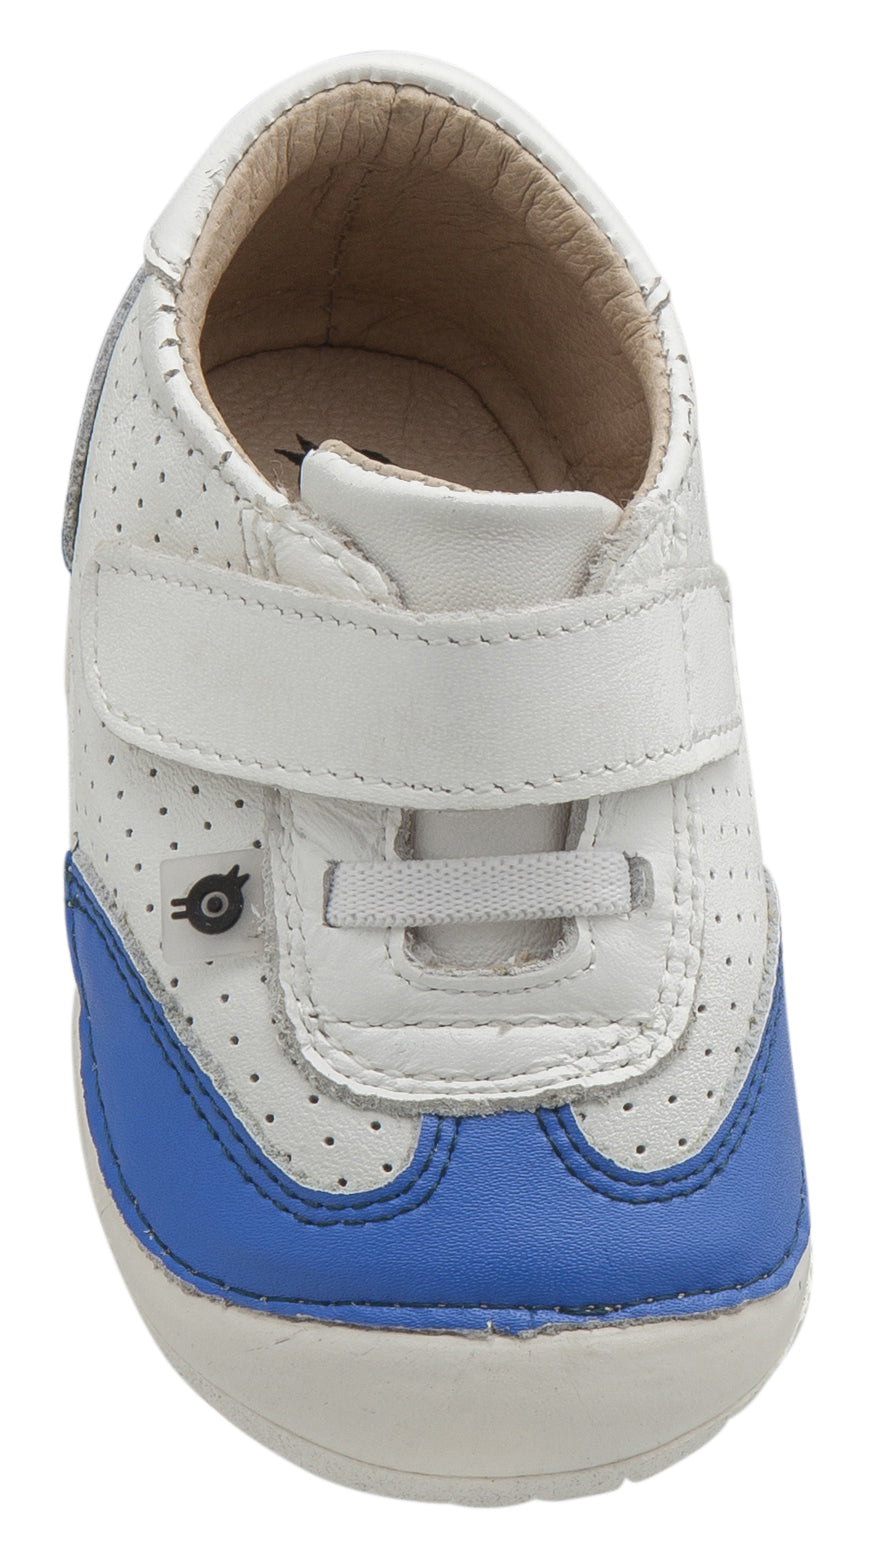 Old Soles Boy's and Girl's Prize Pave Sneakers, Snow/Neon Blue